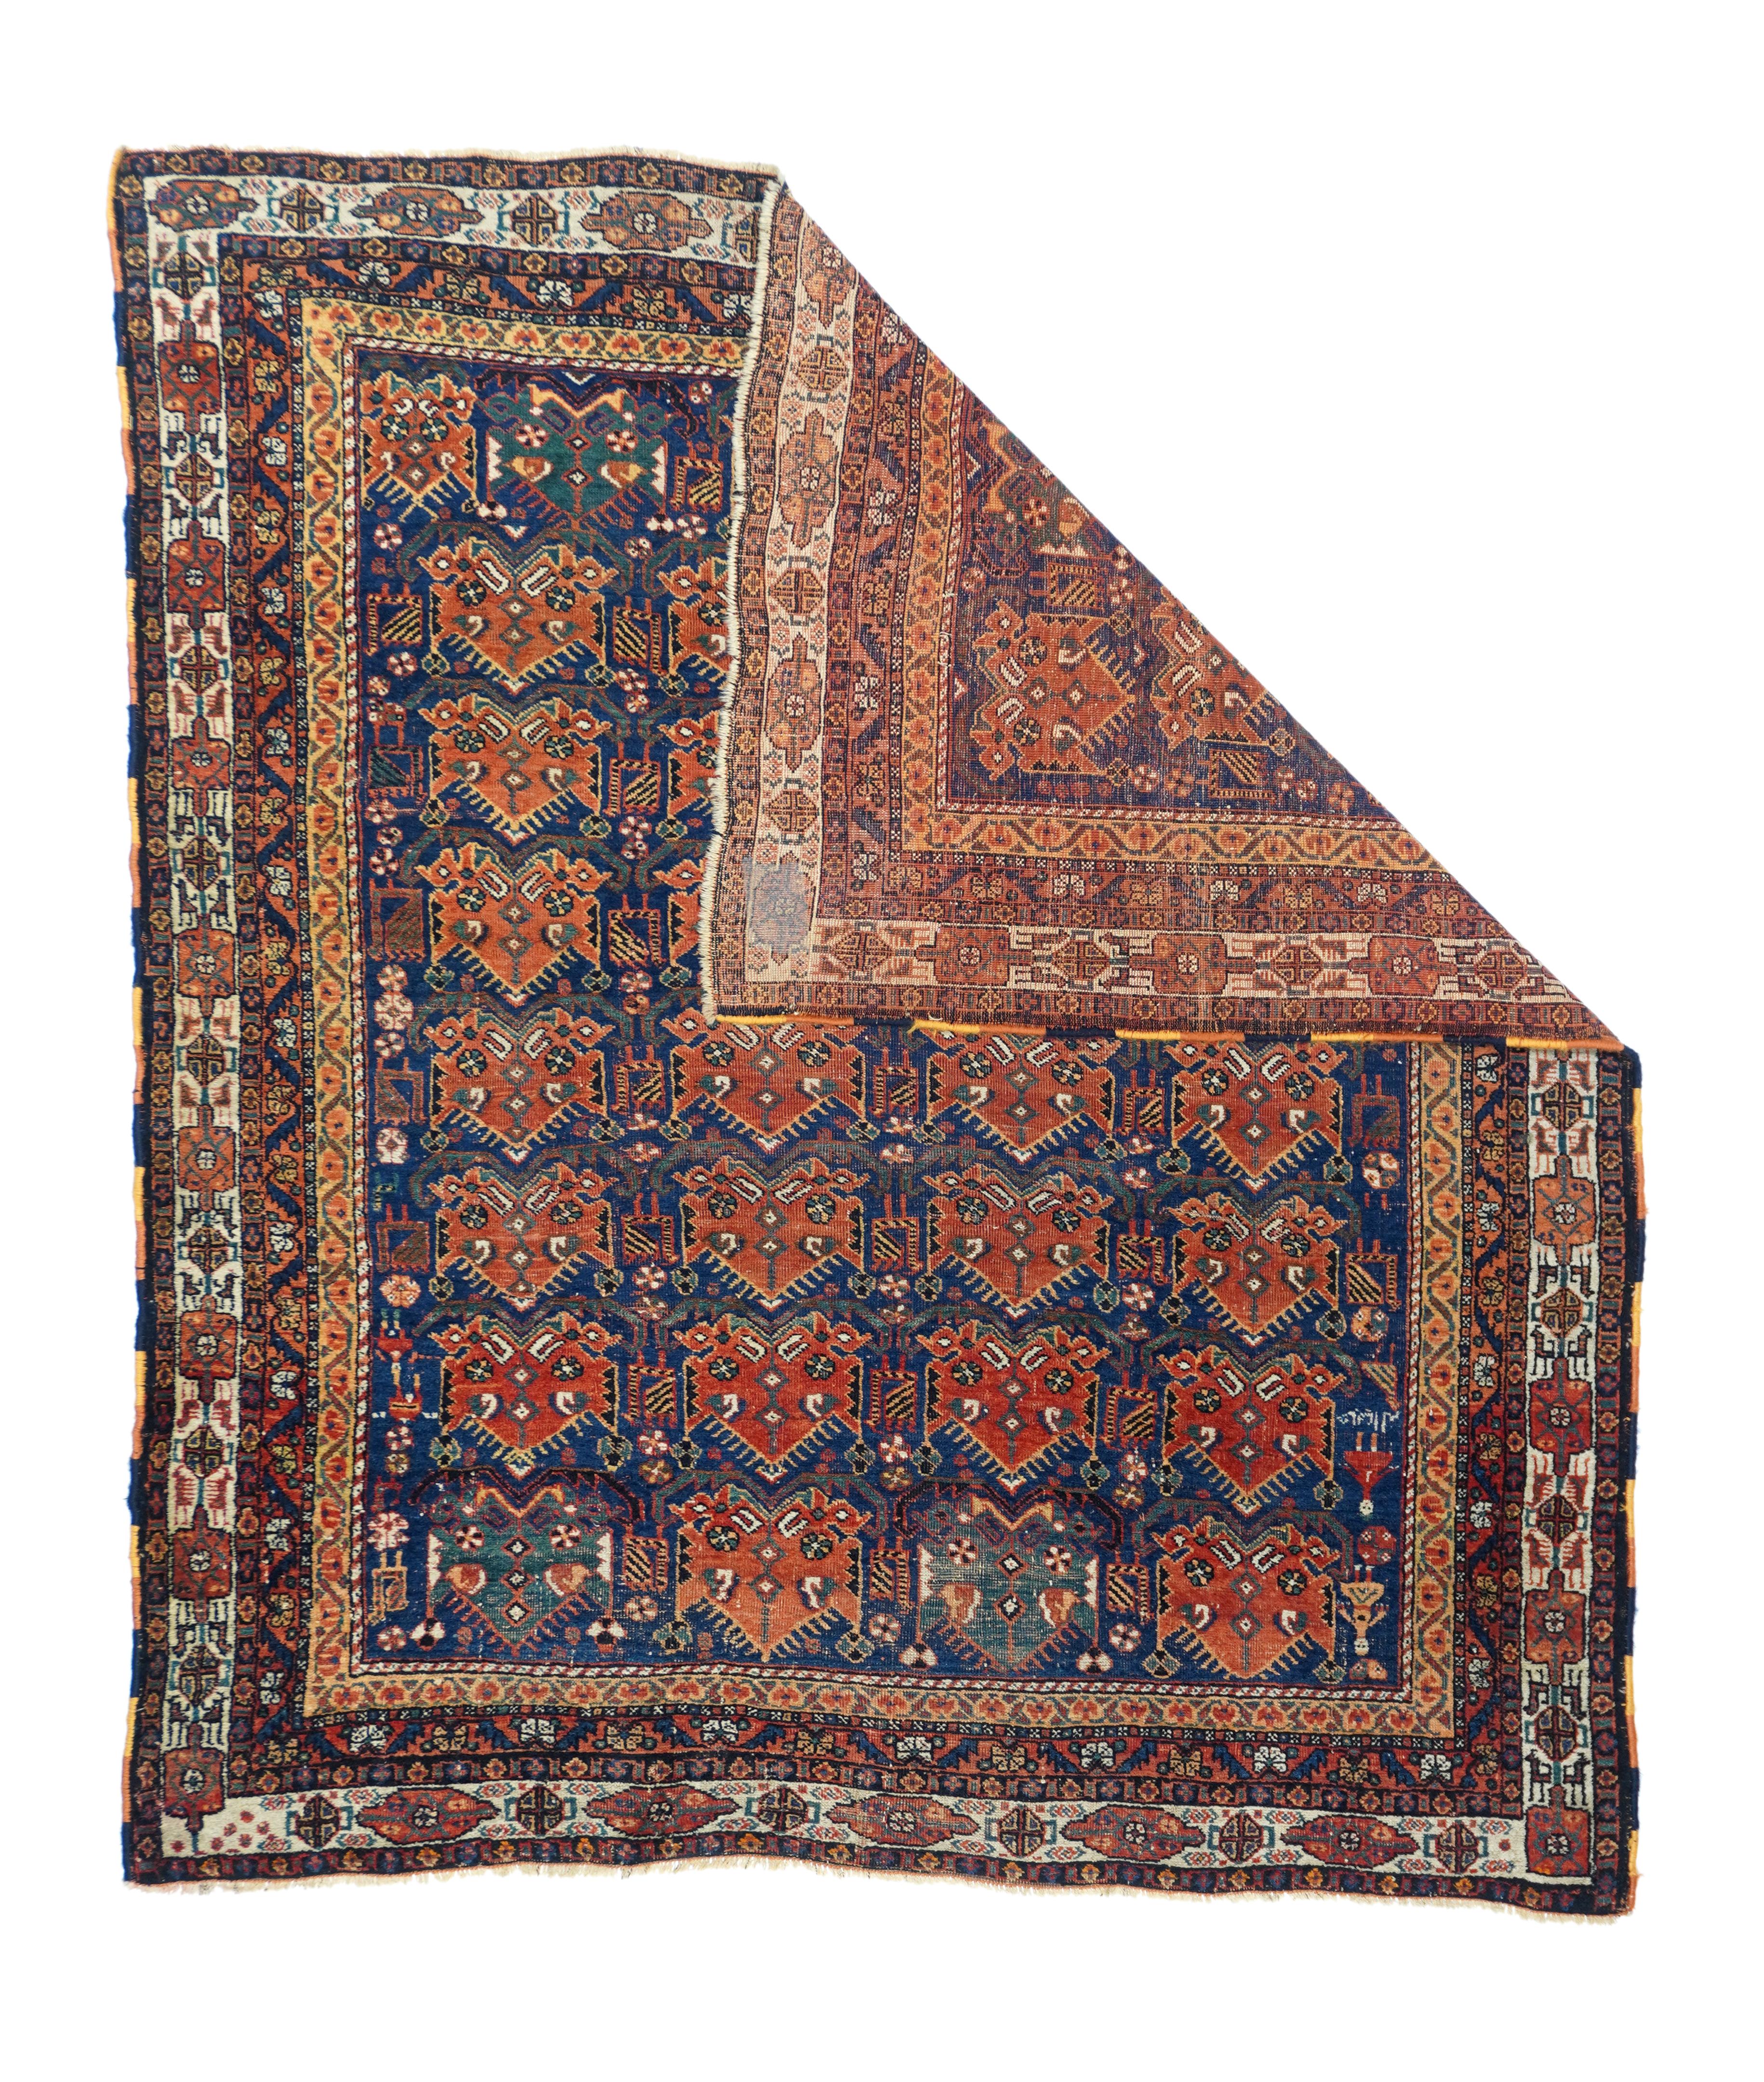 This design is popular on both rugs and bagfaces. This SE Persian tribal square scatter showa four column, eight row array of partially fringed red palmettes on a royal blue ground, with small rosettes and striped birds filling the interstices.